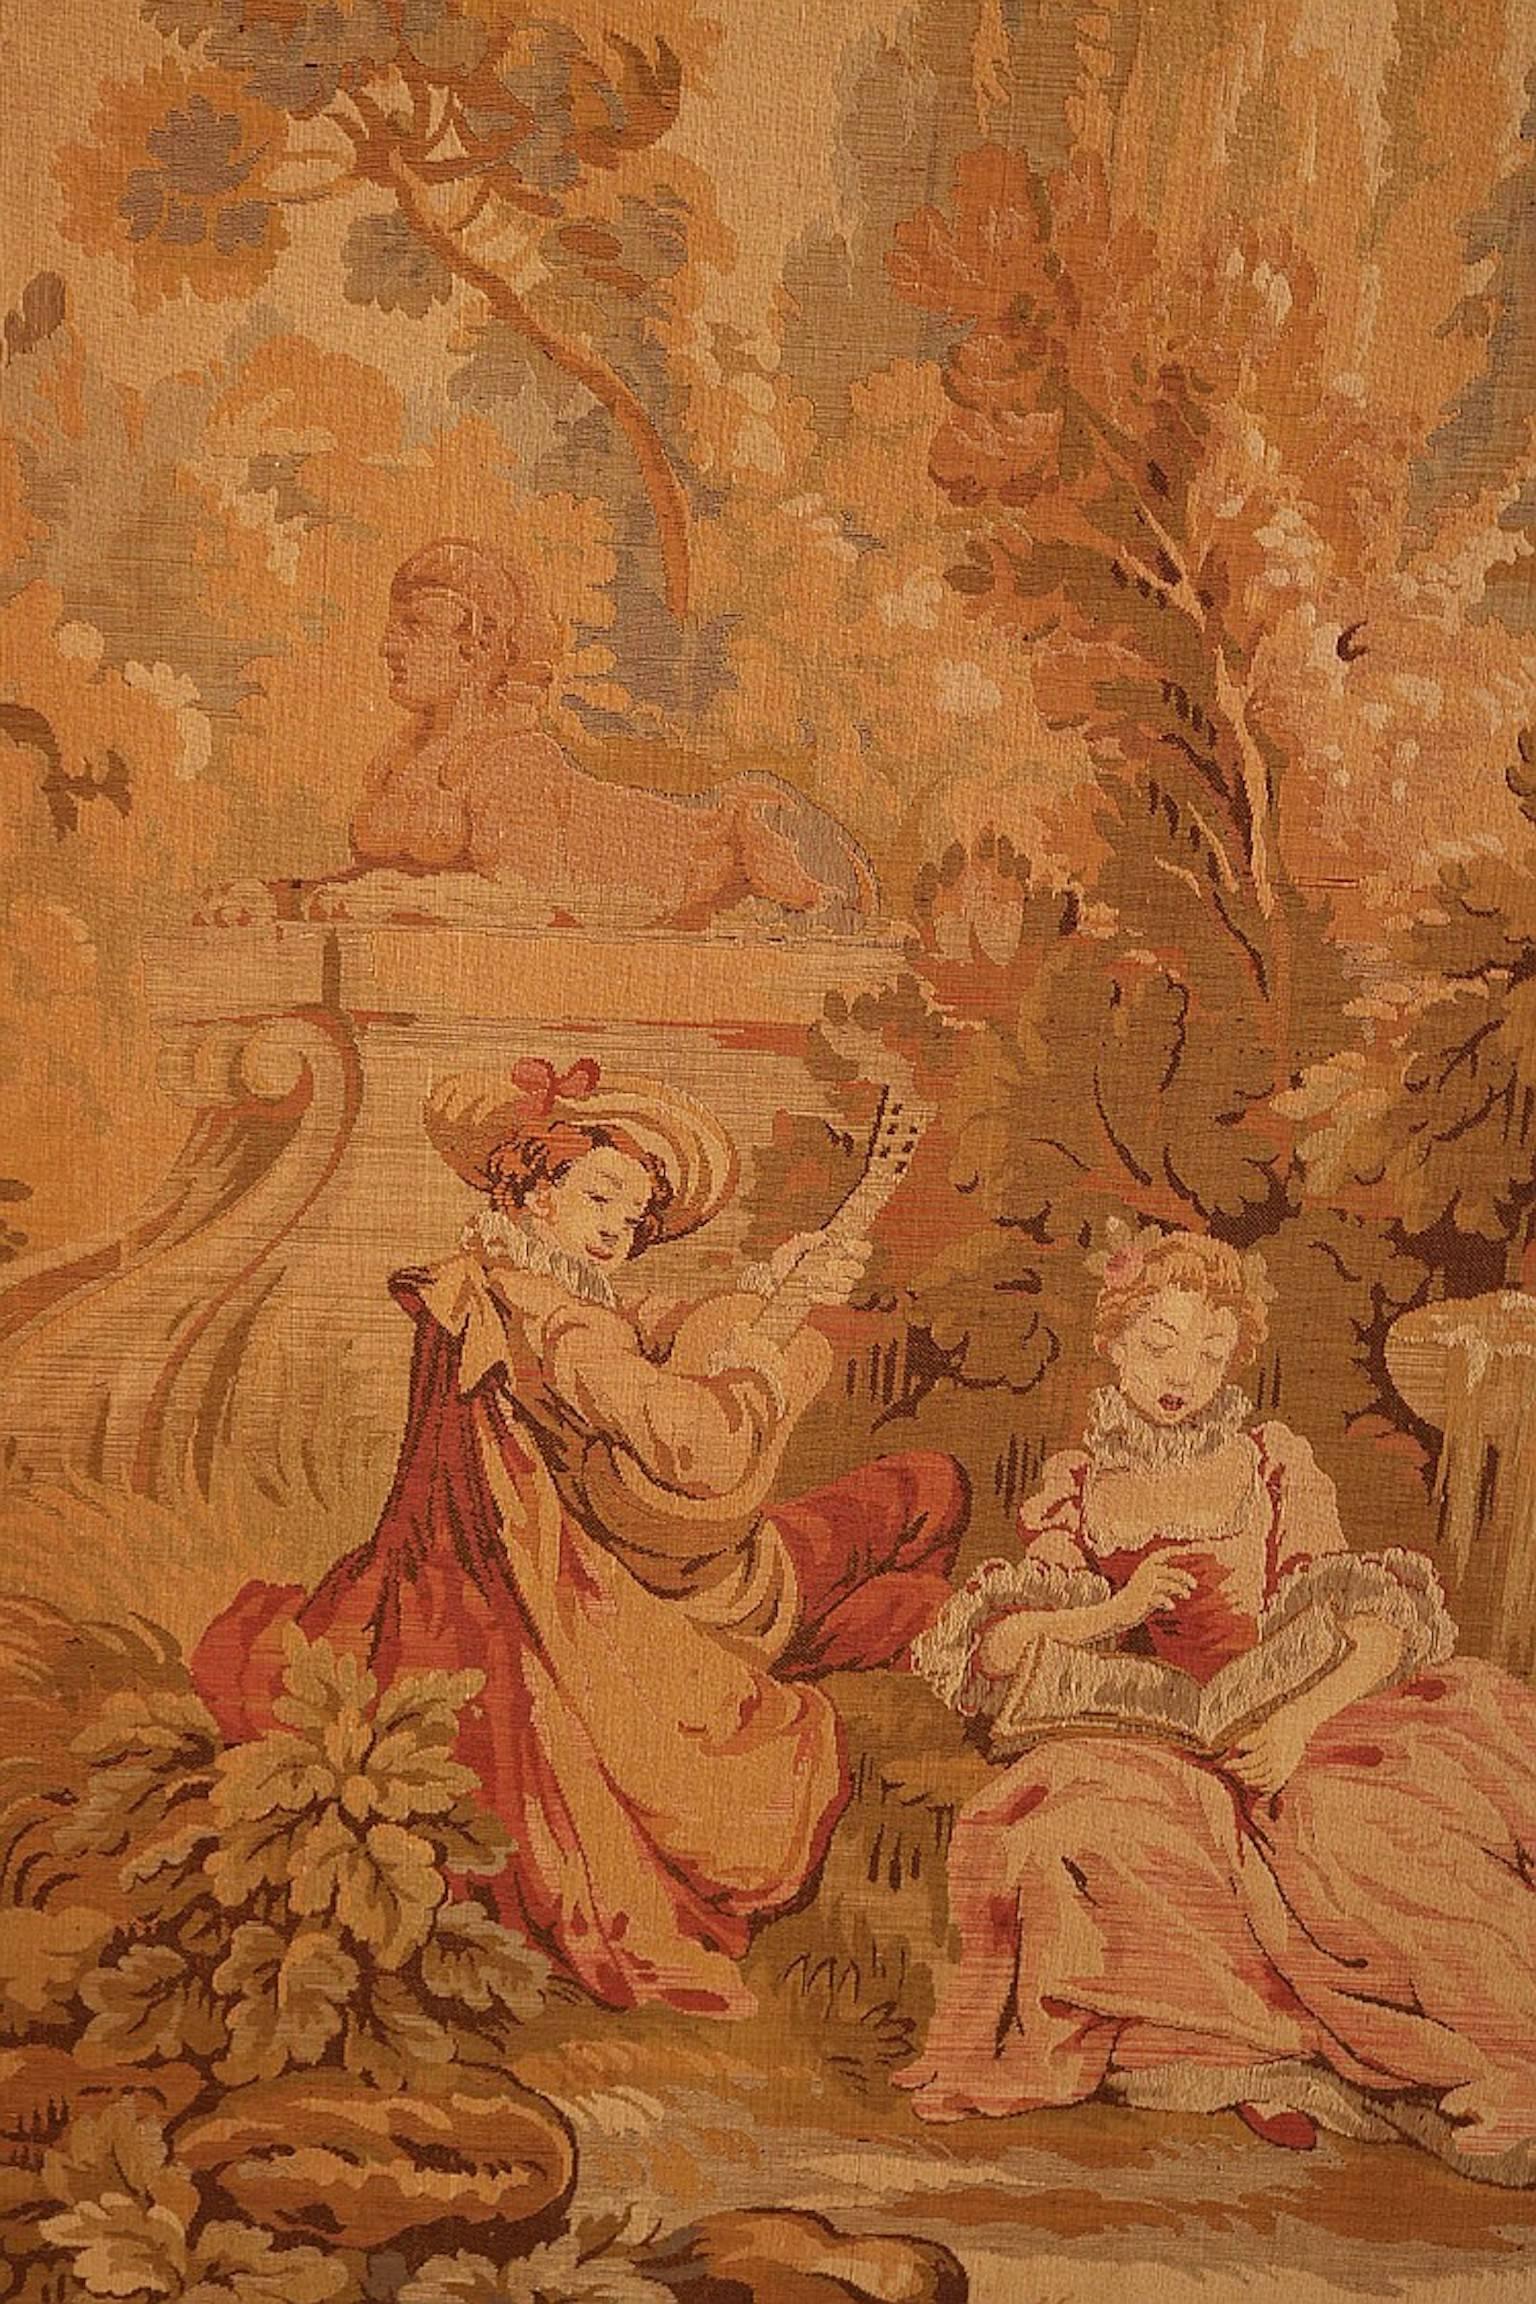 19th century large French tapestry garden scene with courting couple.
Mounted on board. measures: 4' H x 6'4